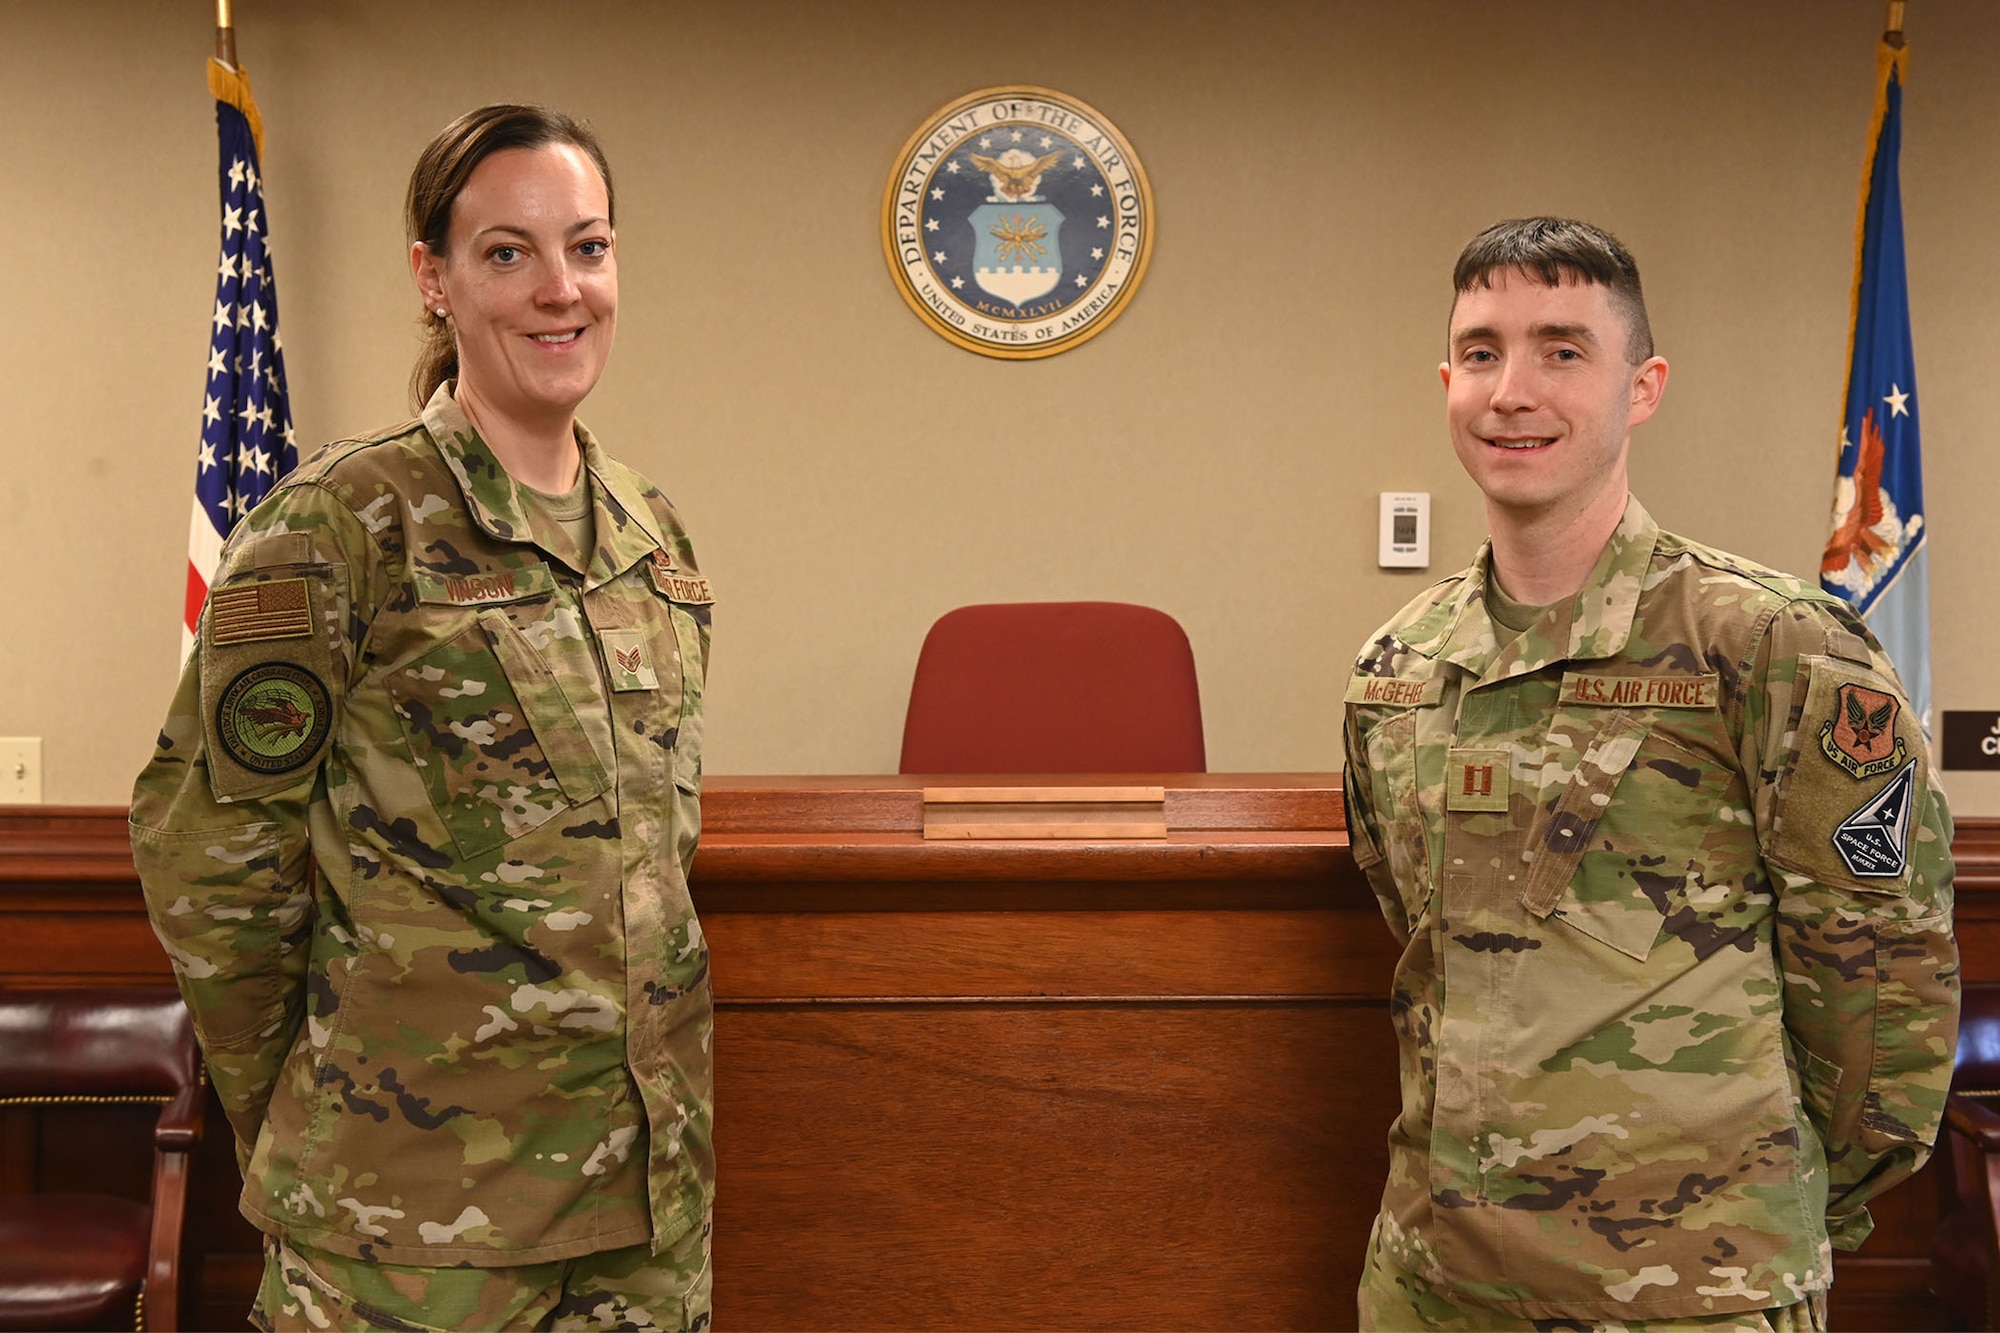 Capt. James McGehee, Malmstrom Air Force Base special victims’ counsel, right, and Staff Sgt. Olga Vinson, Malmstrom AFB paralegal, pose for a photo inside of the courtroom at Malmstrom AFB, Mont. The SVC is a military attorney and paralegal team who operate outside of the installation’s chain of command to represent victims of sexual assault, sexual harassment and interpersonal violence. (U.S. Air Force photo by Airman Elijah Van Zandt)